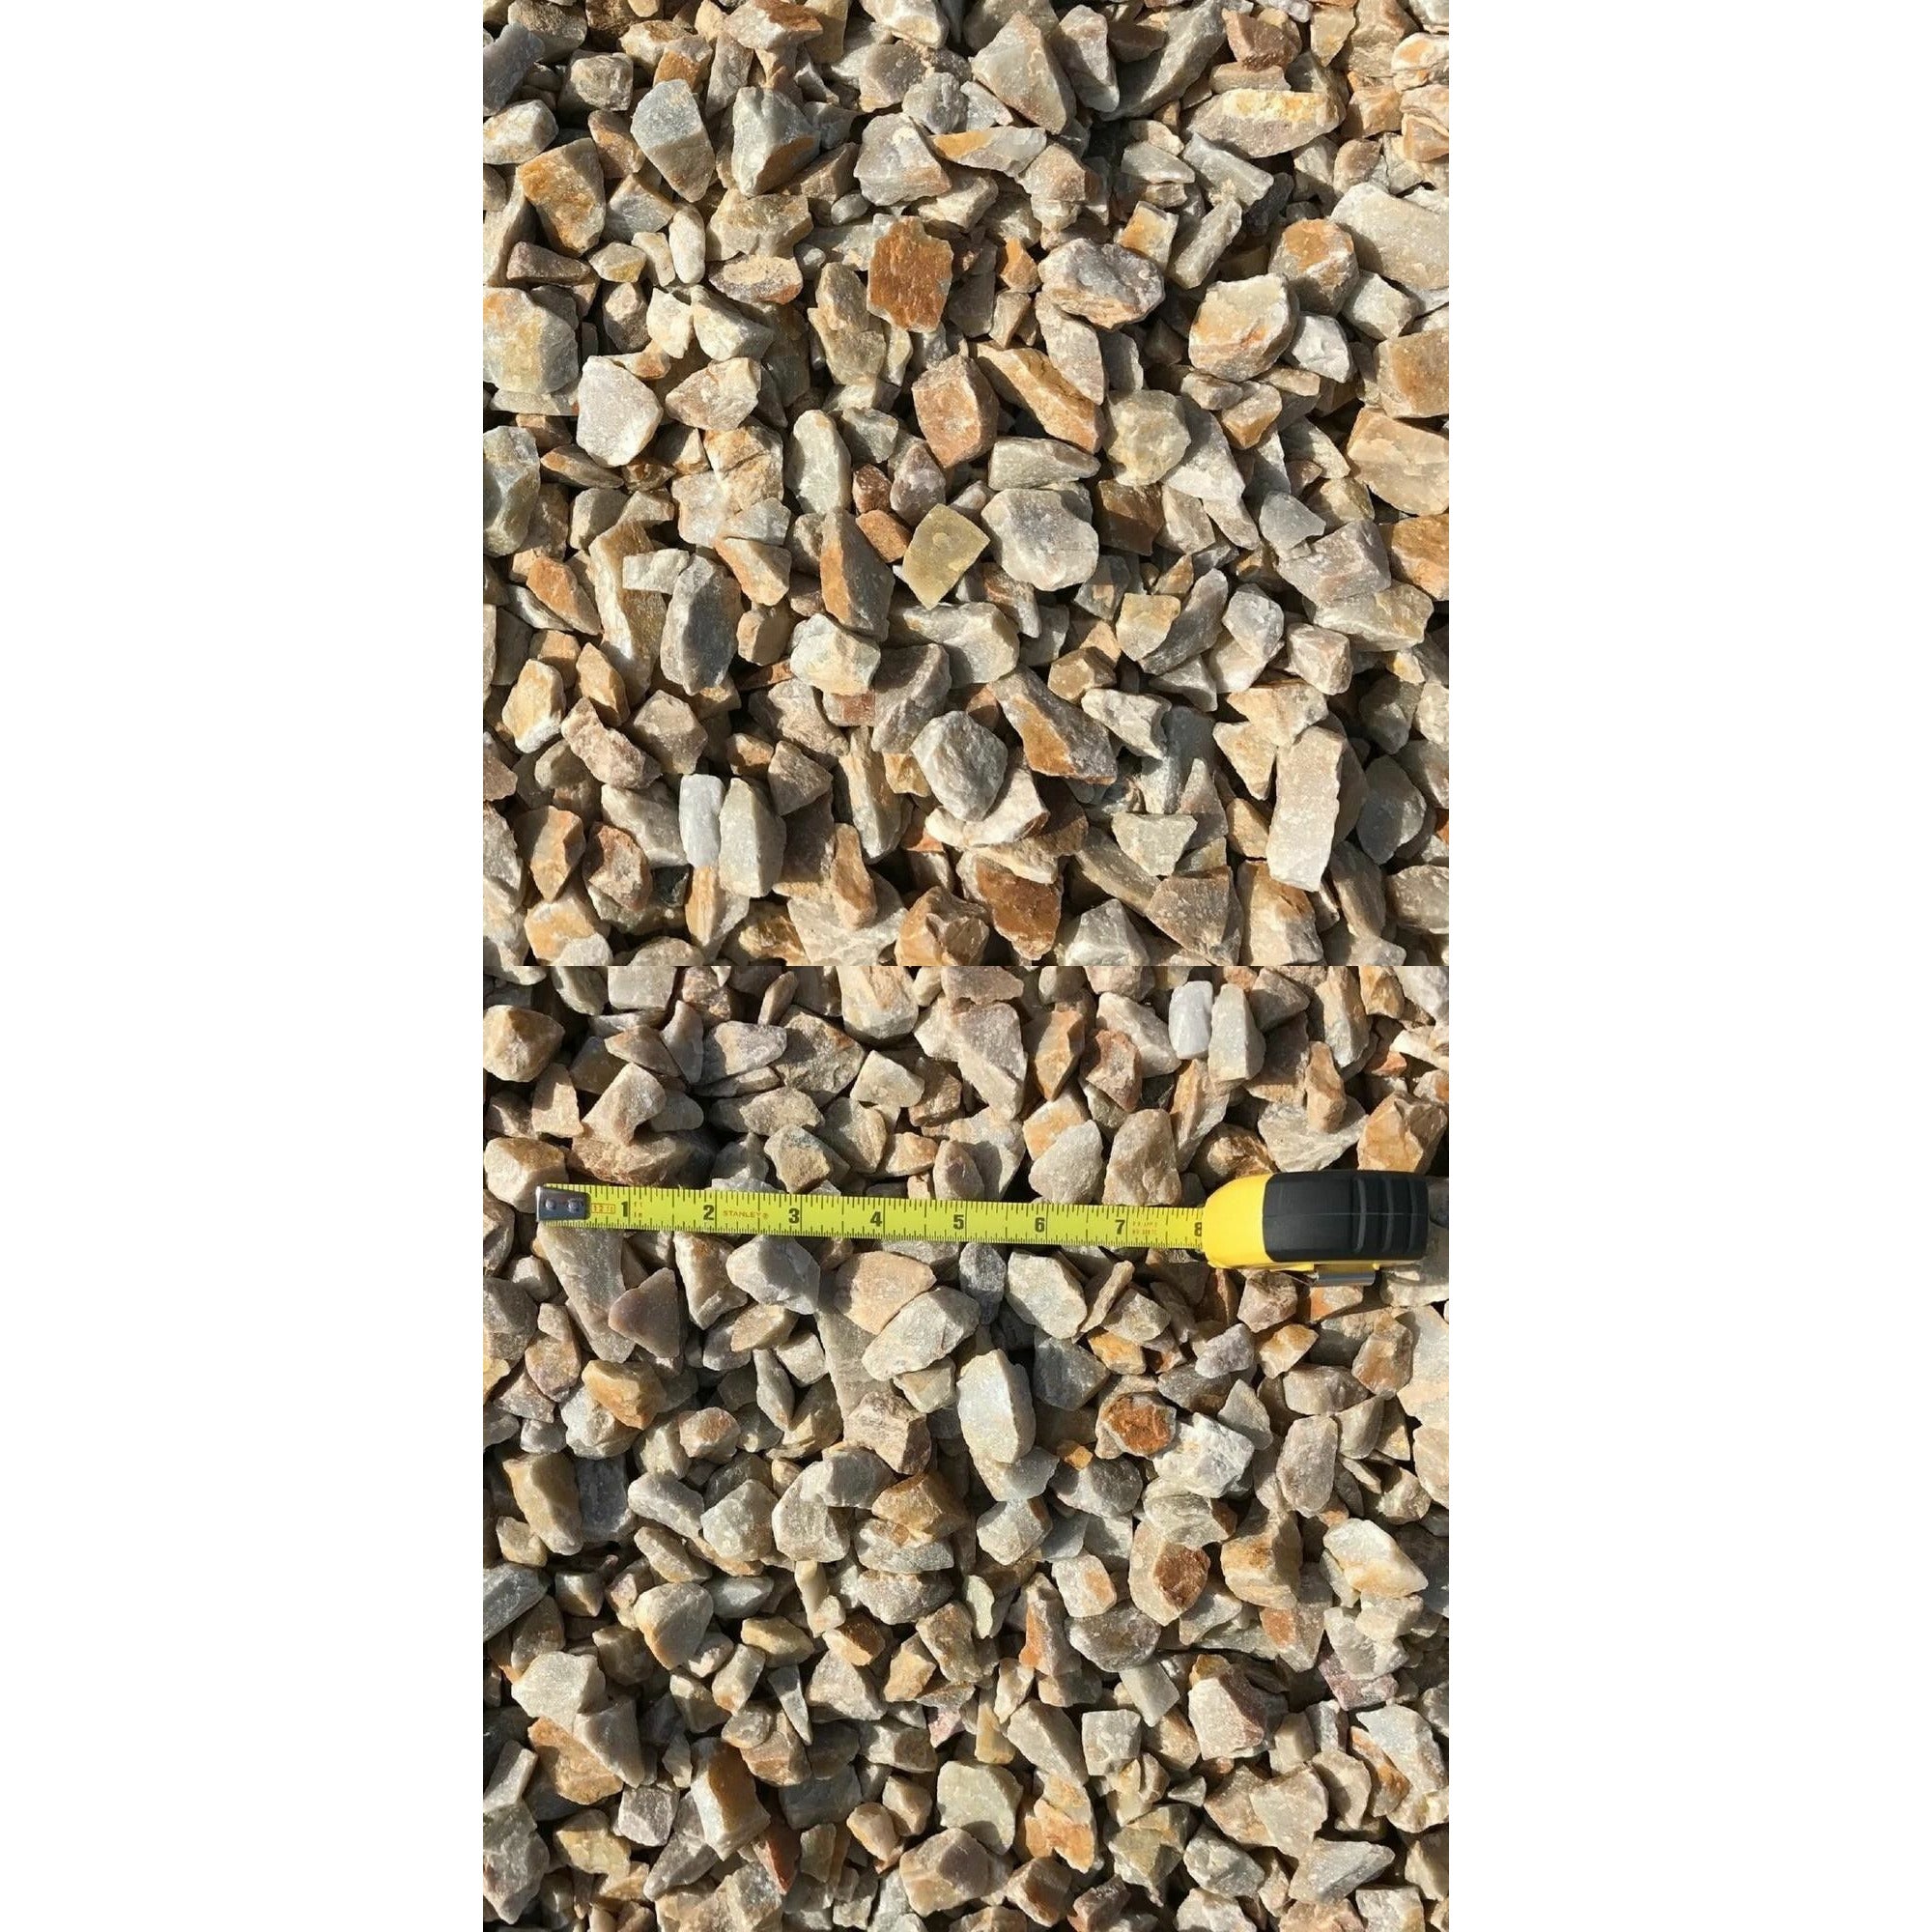 13MM Brown Crushed Stone Gravel -  4 Tons